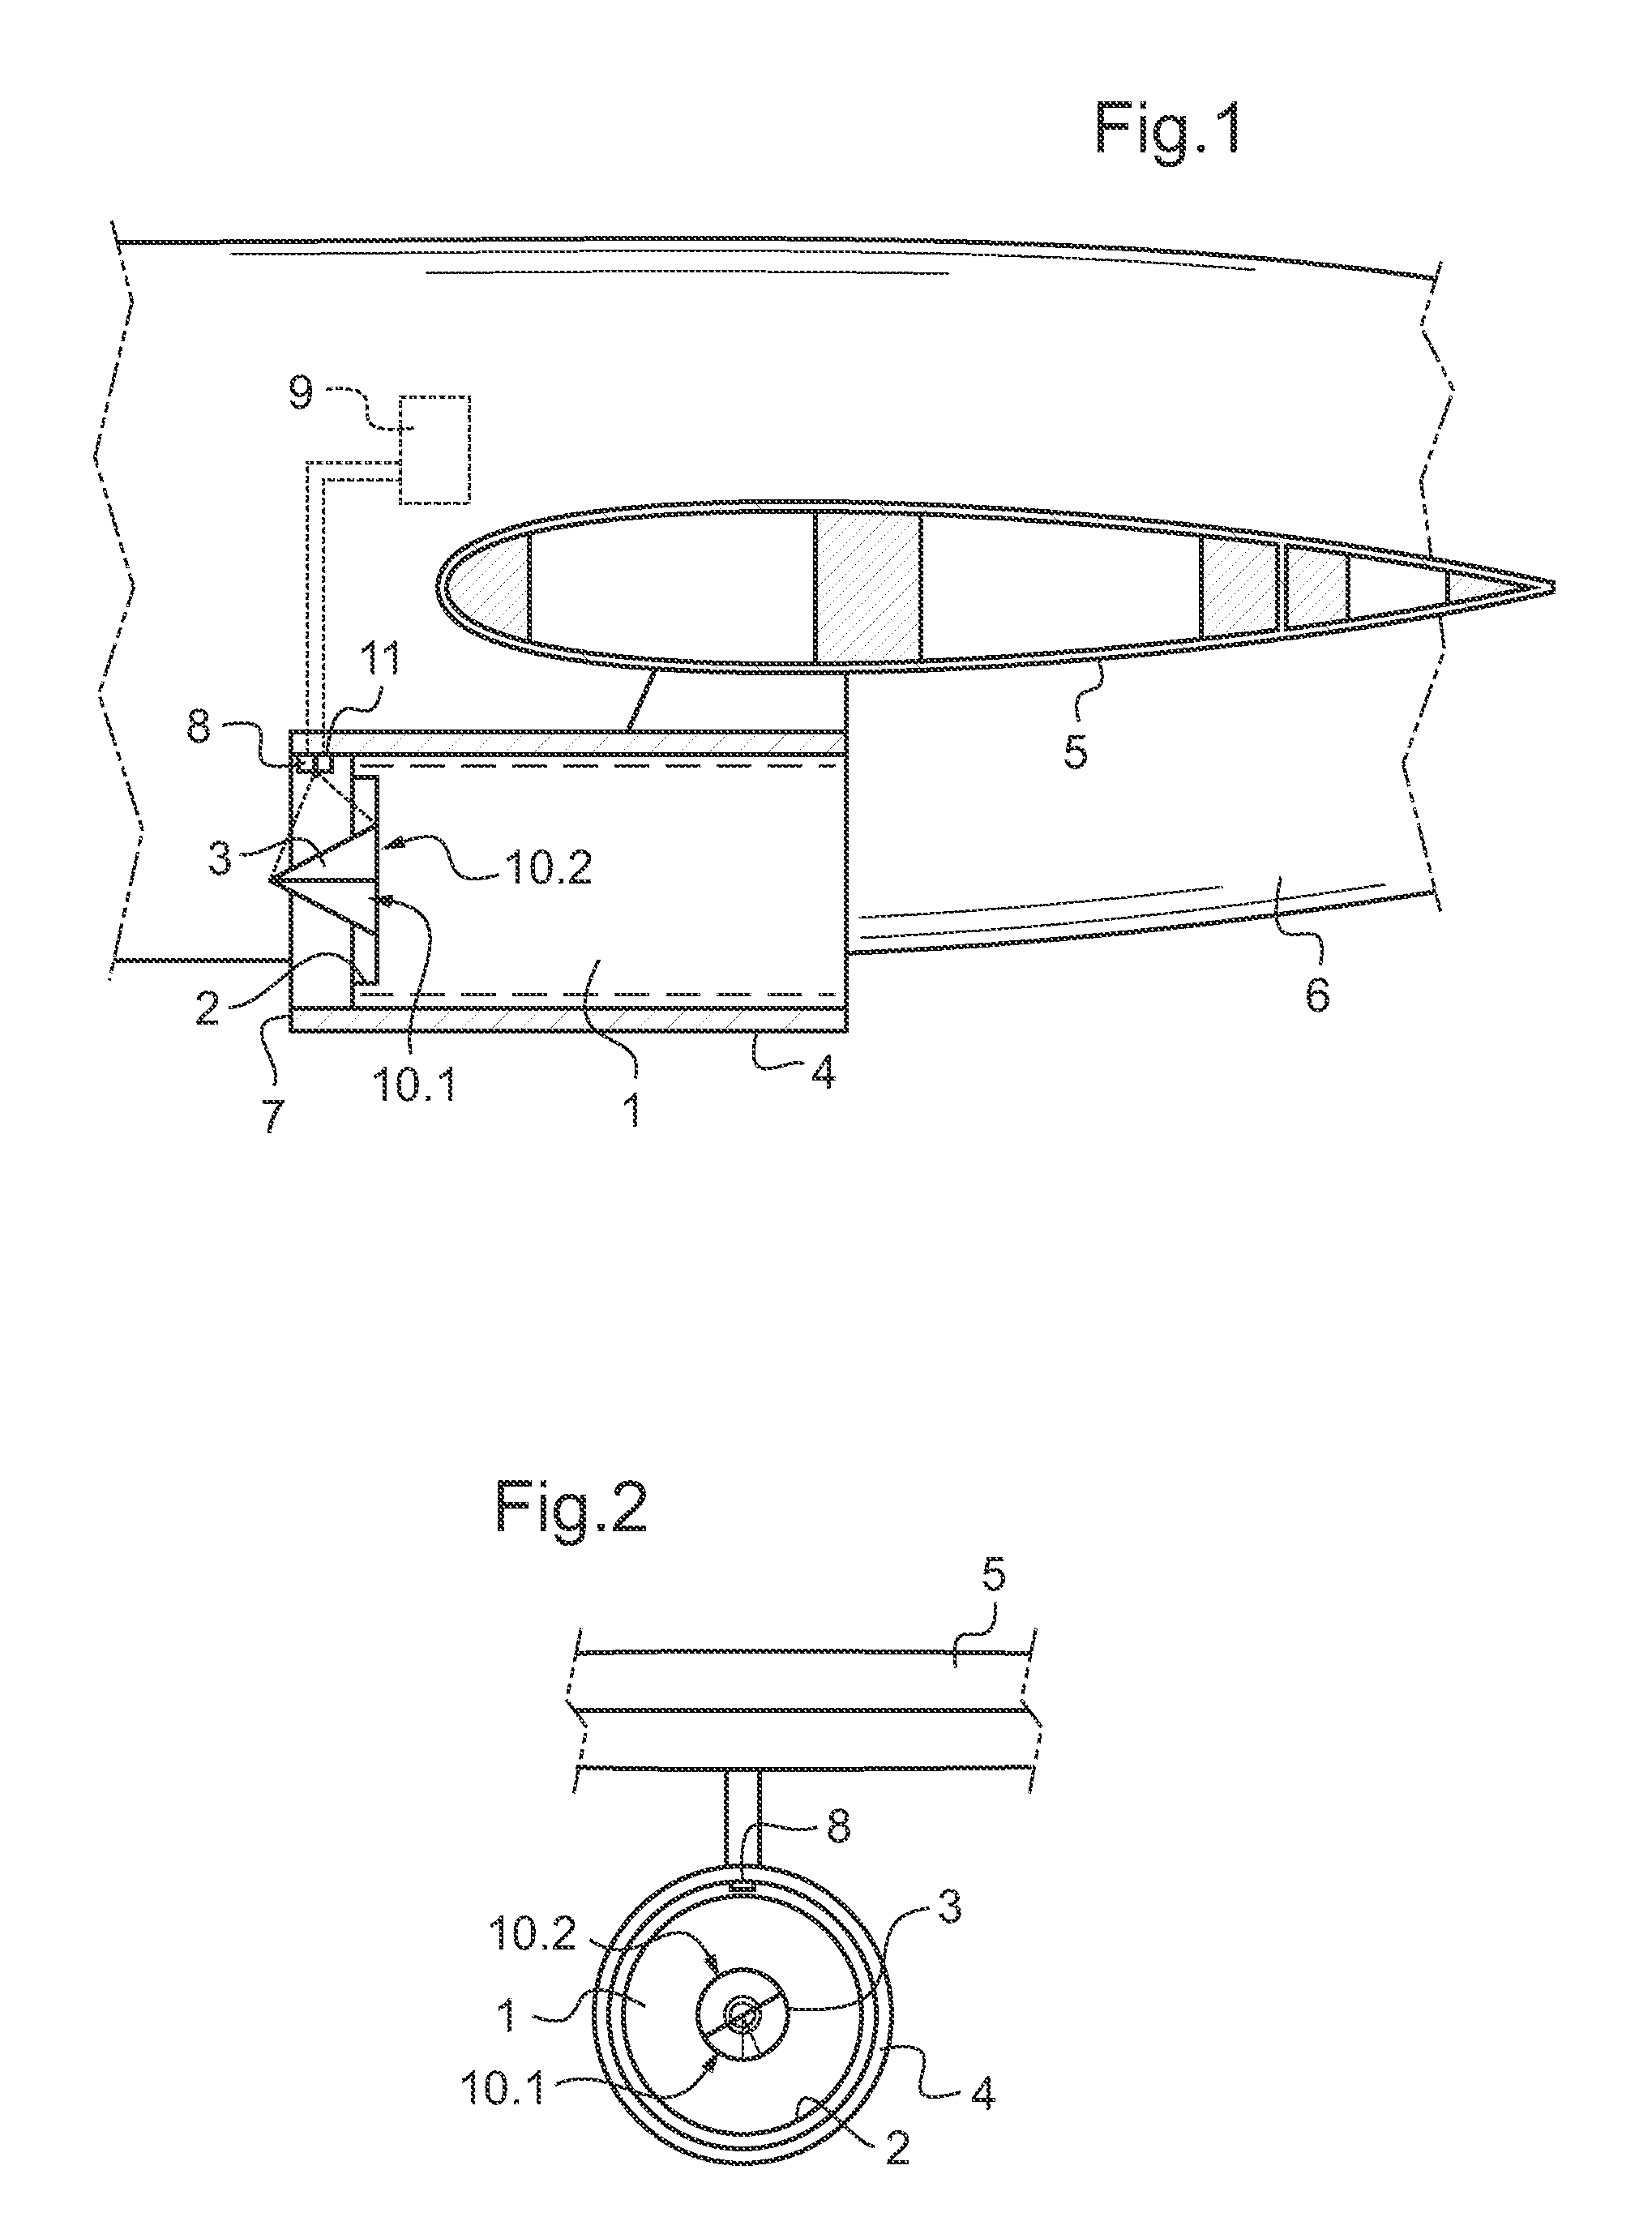 Engine and pod assembly for an aircraft, equipped with an Anti-icing device